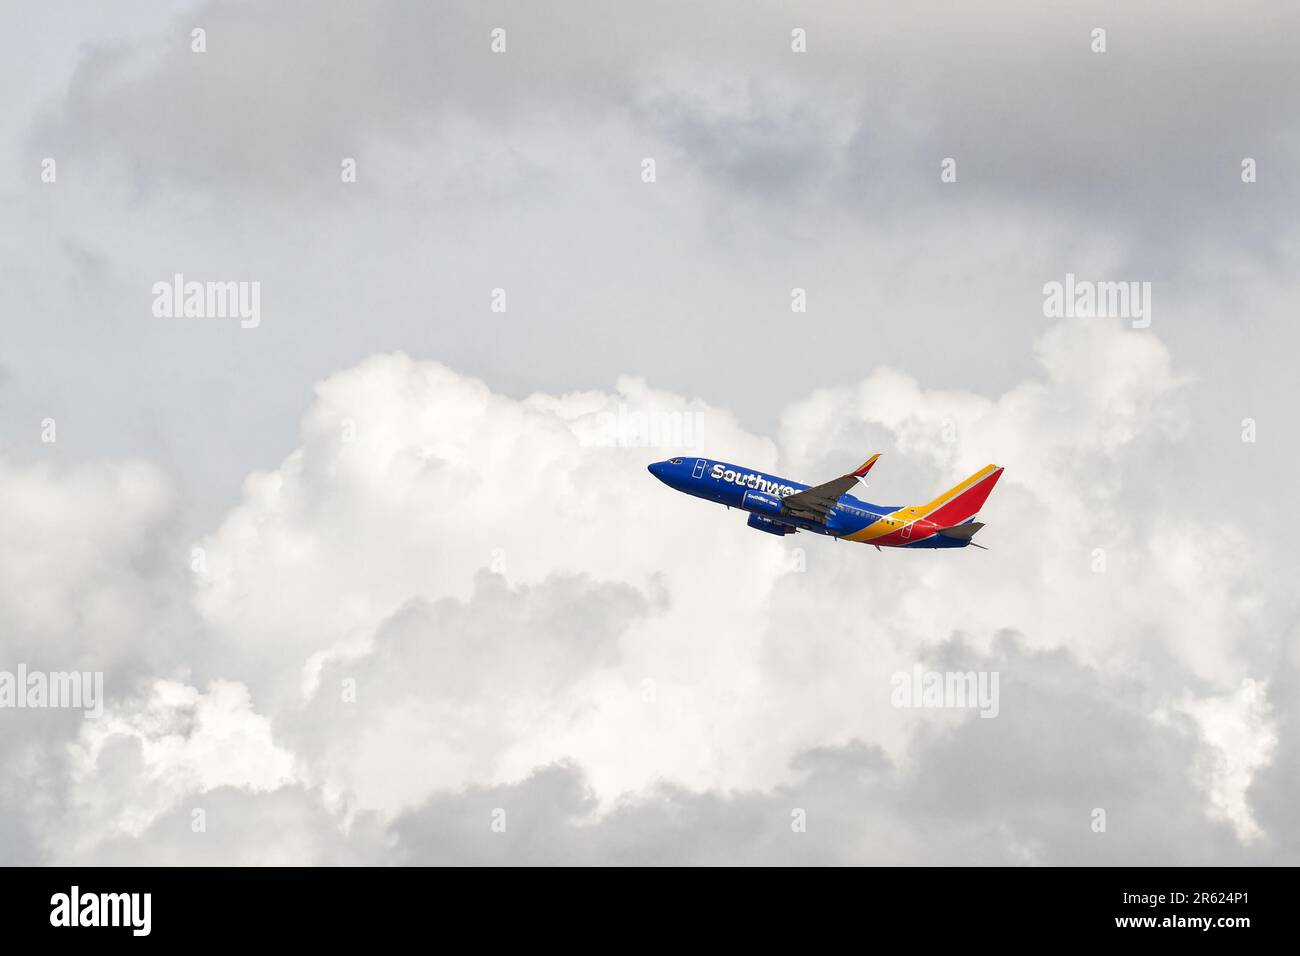 Phoenix, AZ - March 16, 2023: Southwest Airlines plane taking off  from Phoenix Sky Harbor International Airport into the clouds. Stock Photo